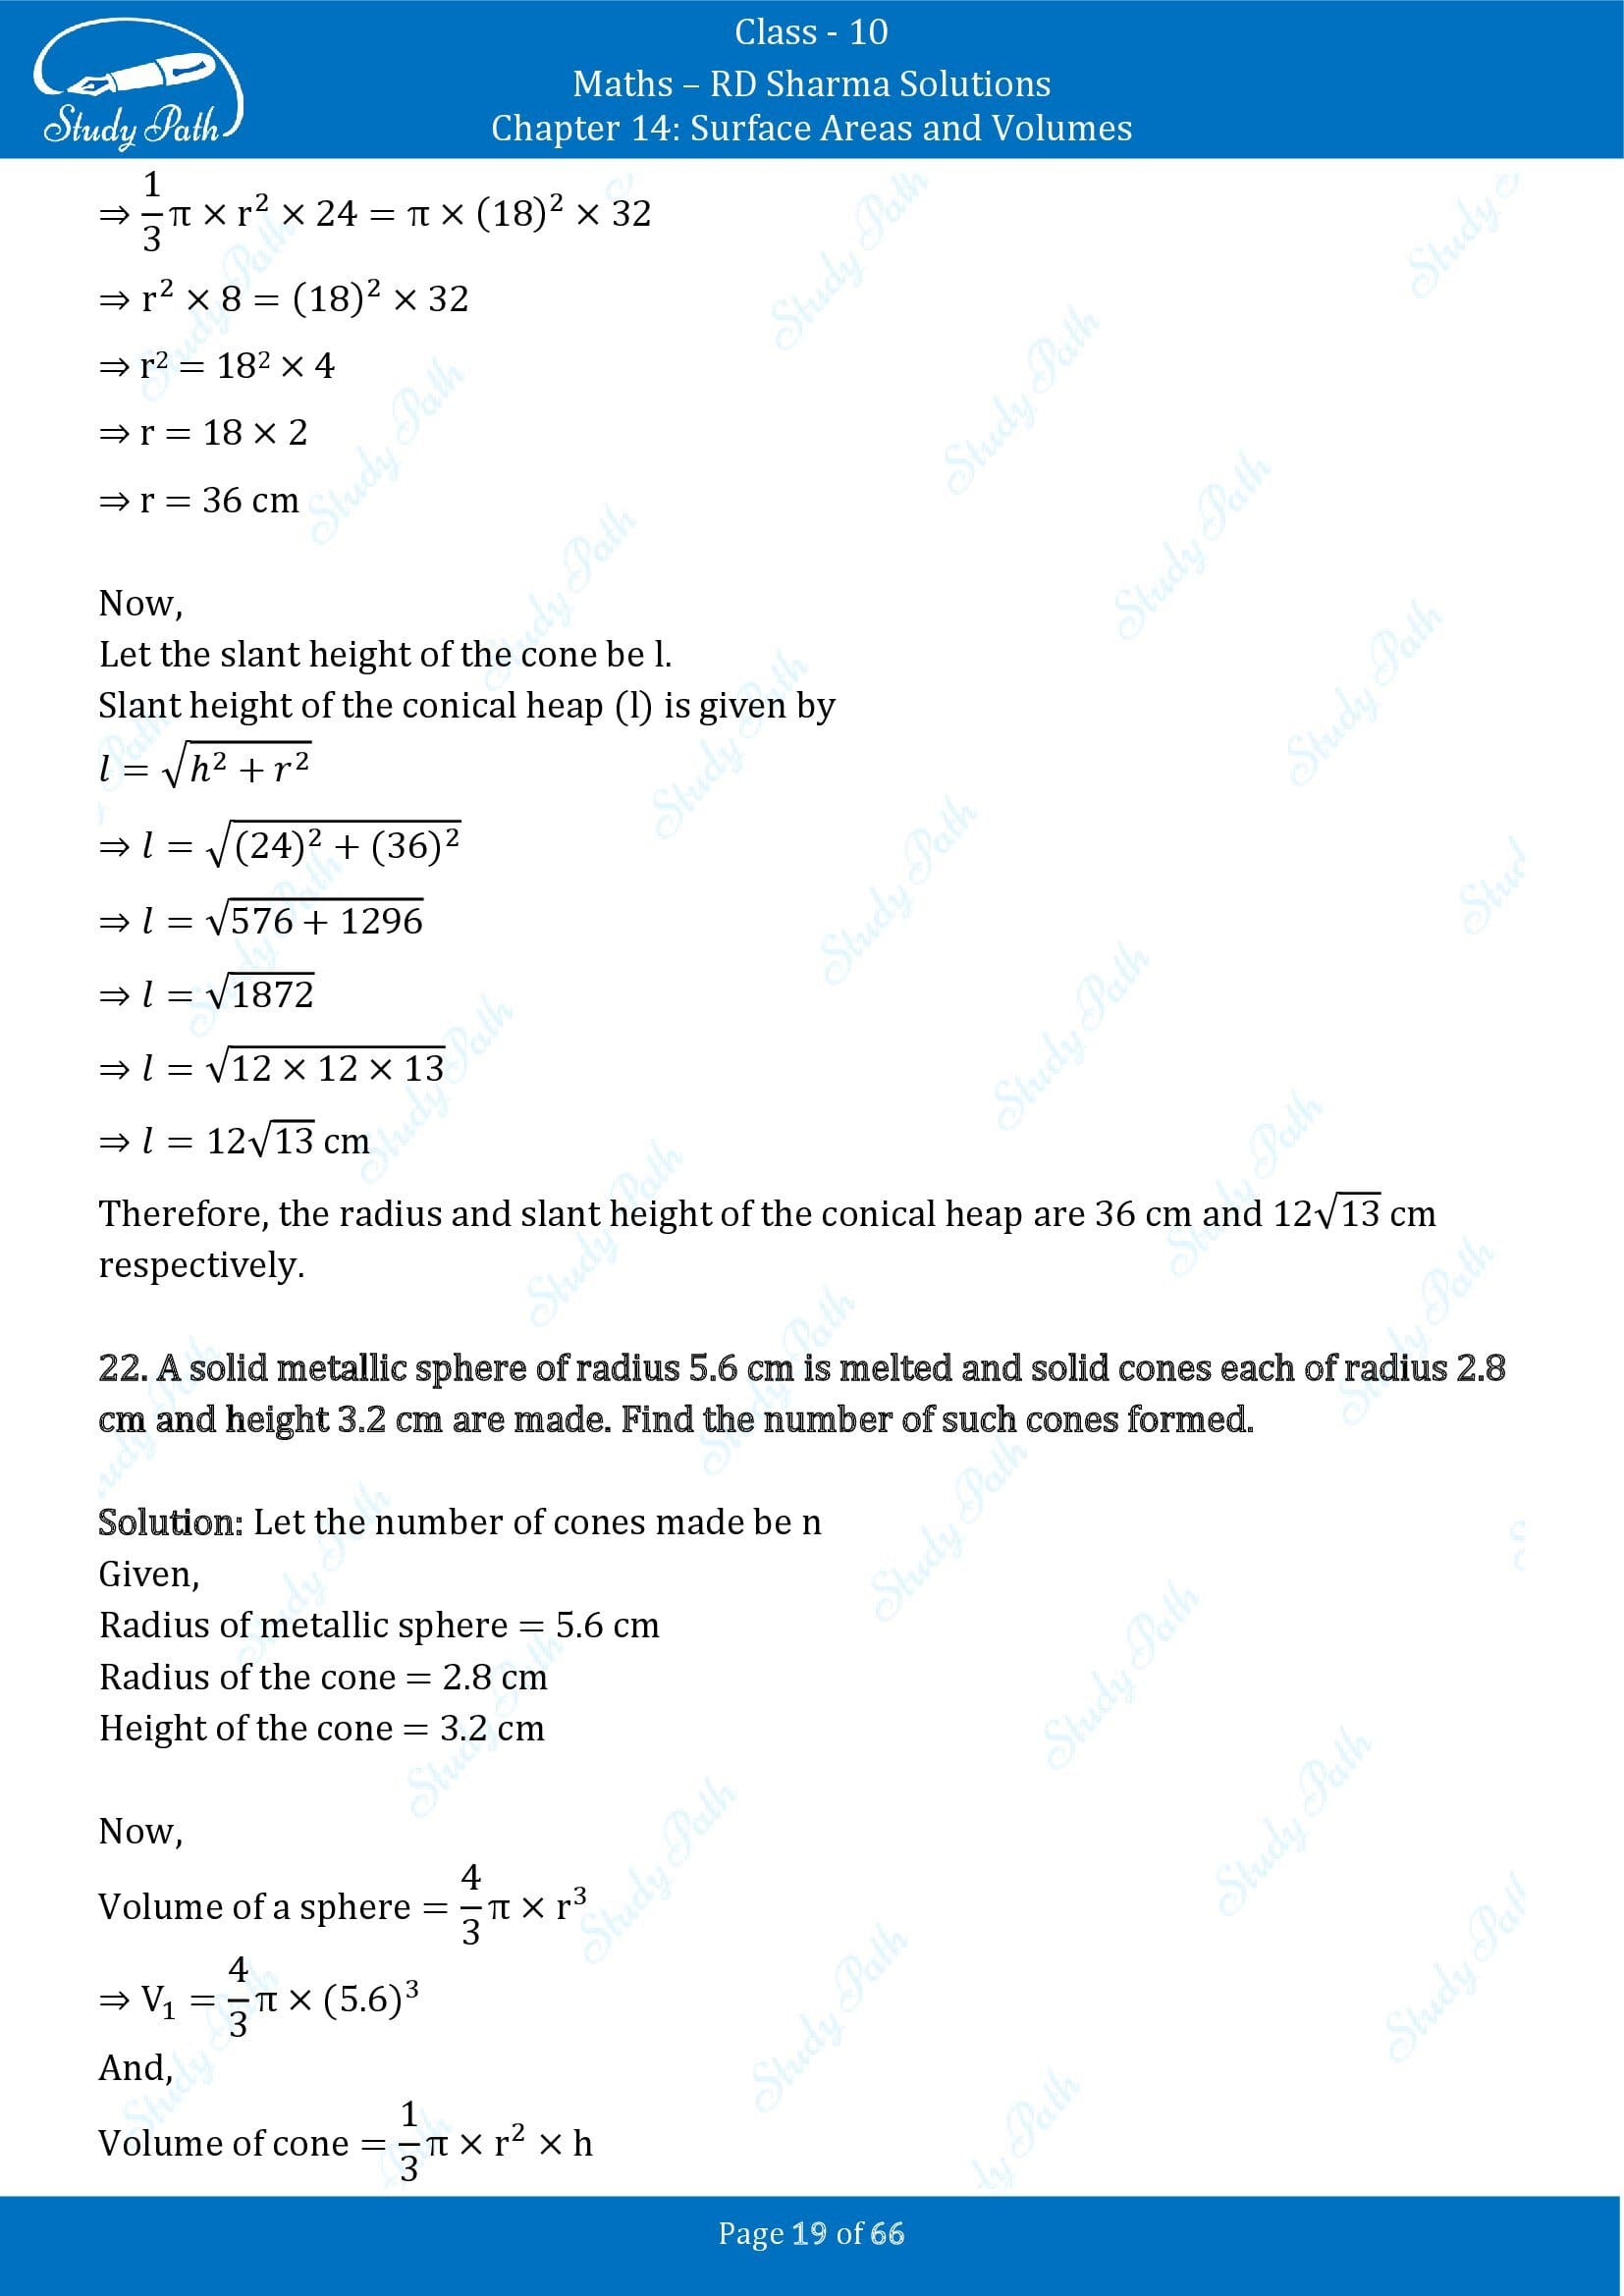 RD Sharma Solutions Class 10 Chapter 14 Surface Areas and Volumes Exercise 14.1 00019